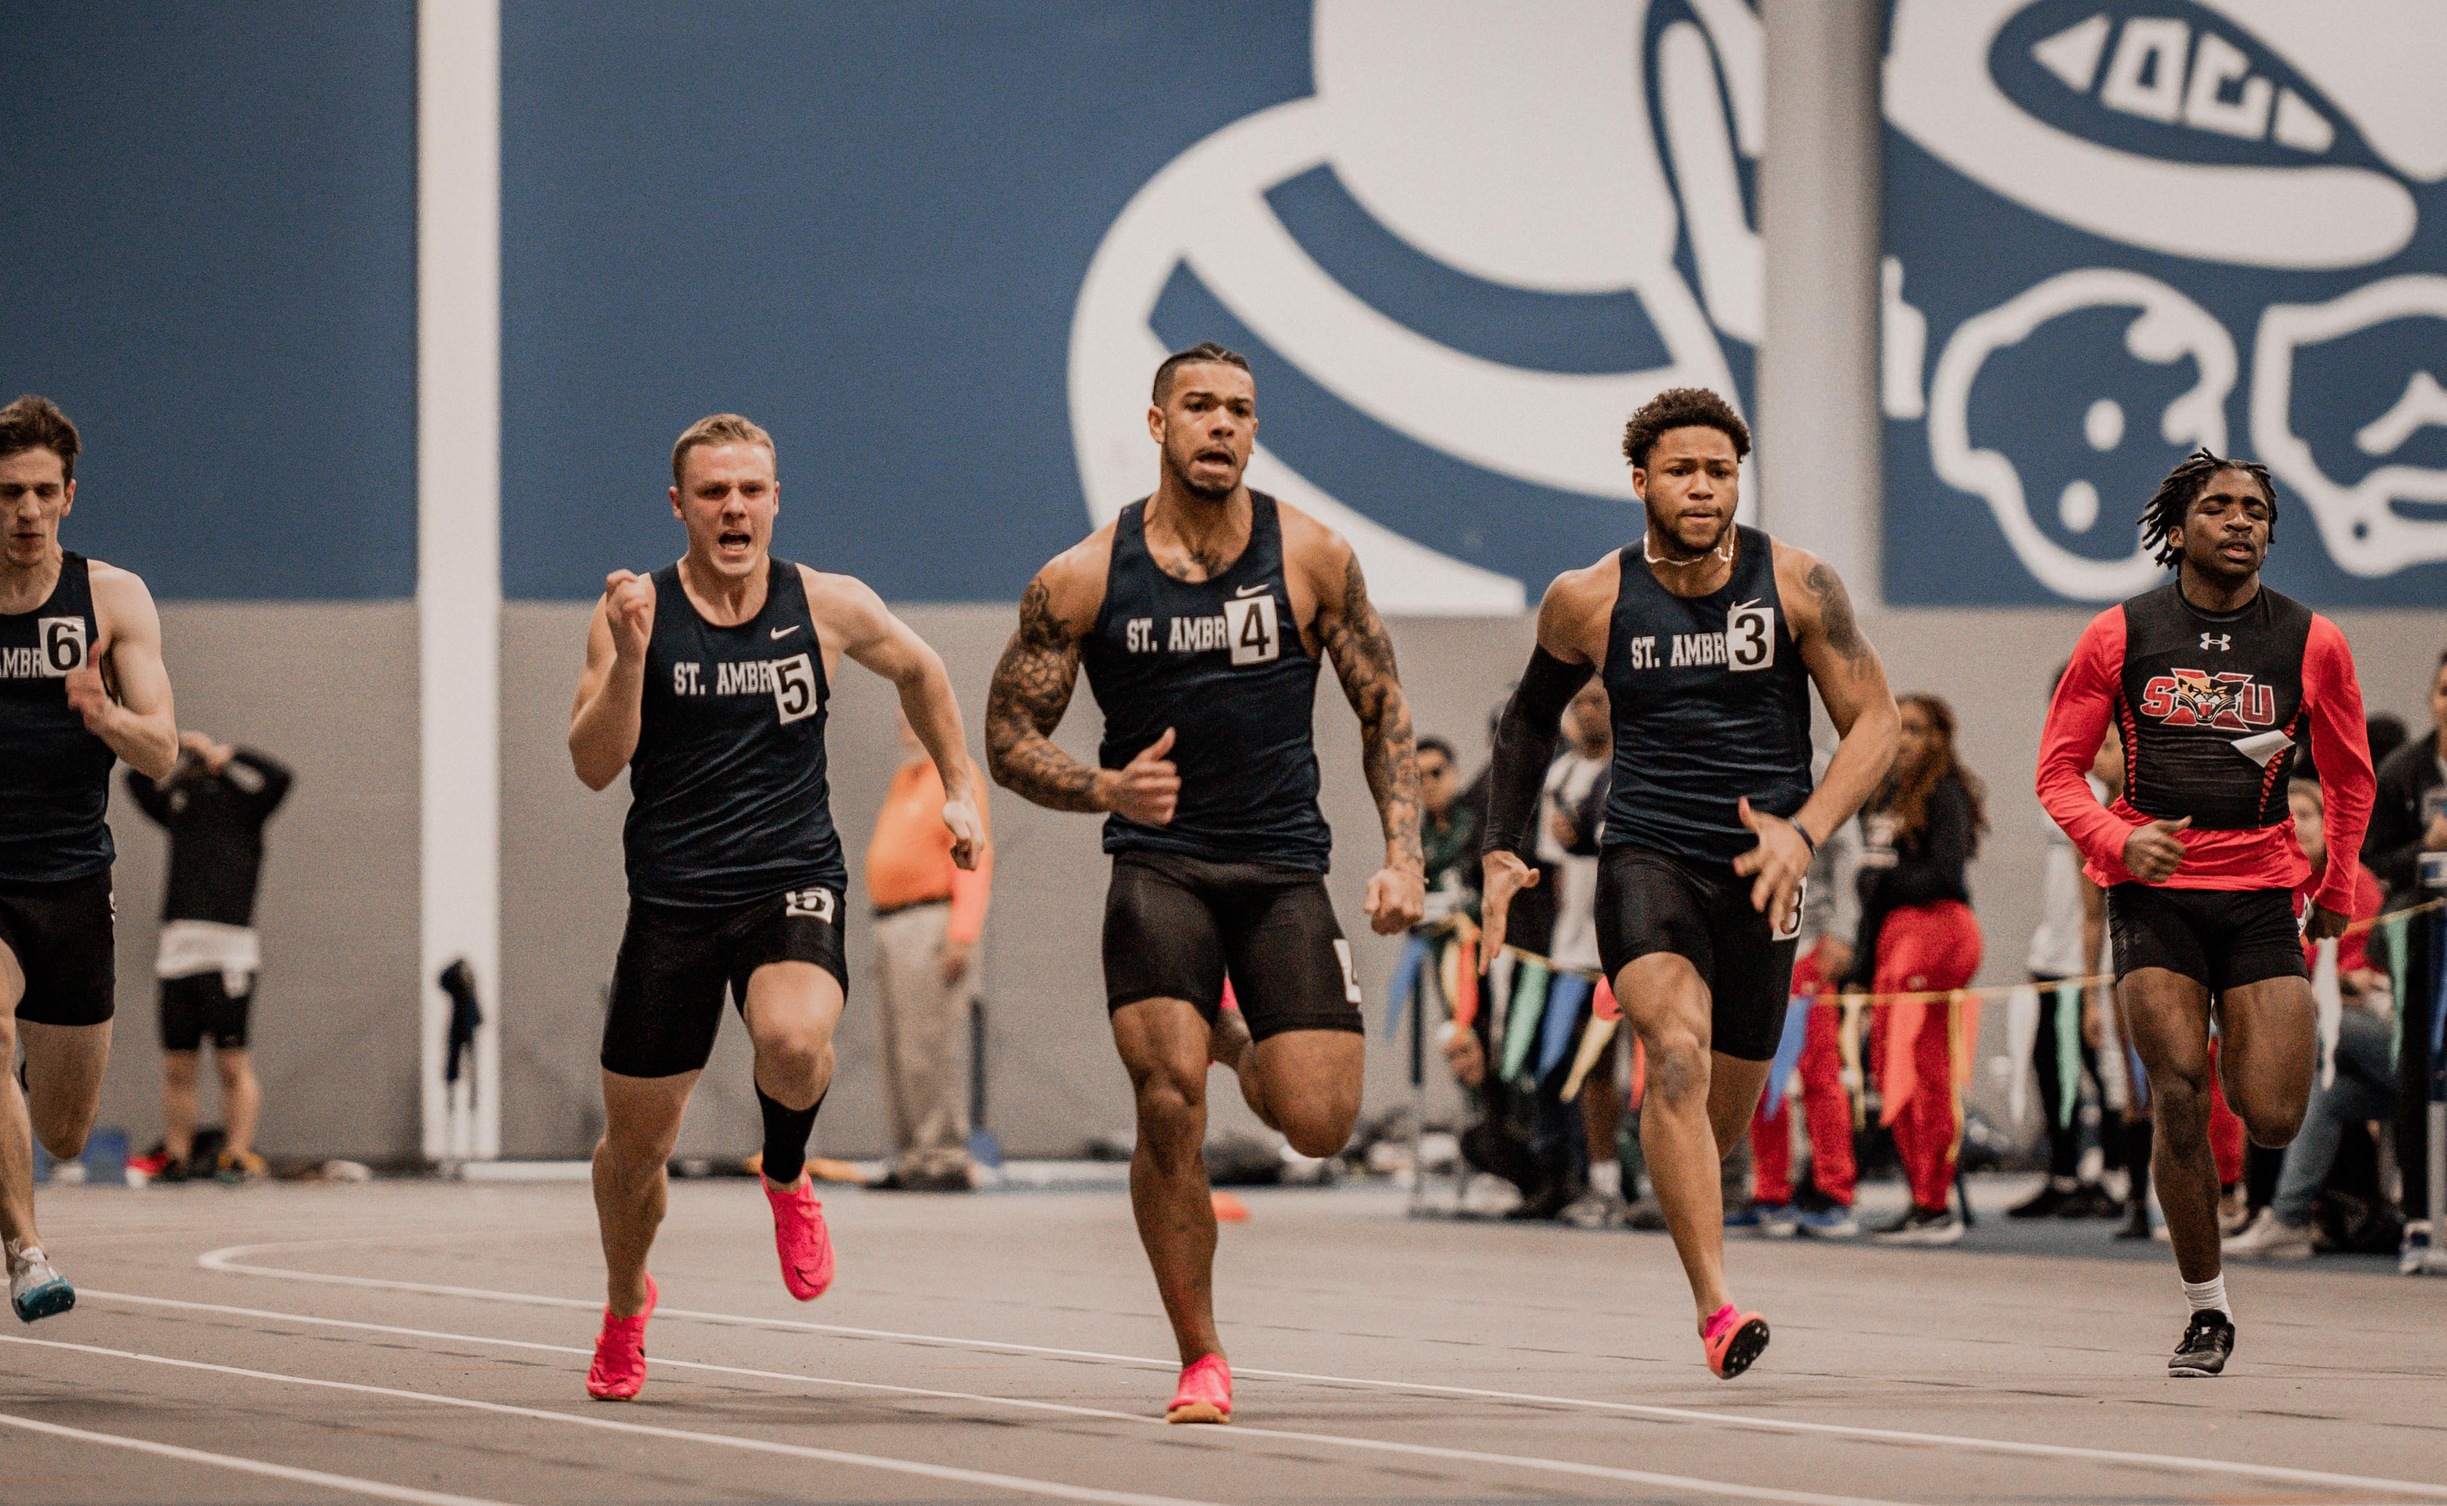 Men second, women fourth at CCAC Indoor Championships